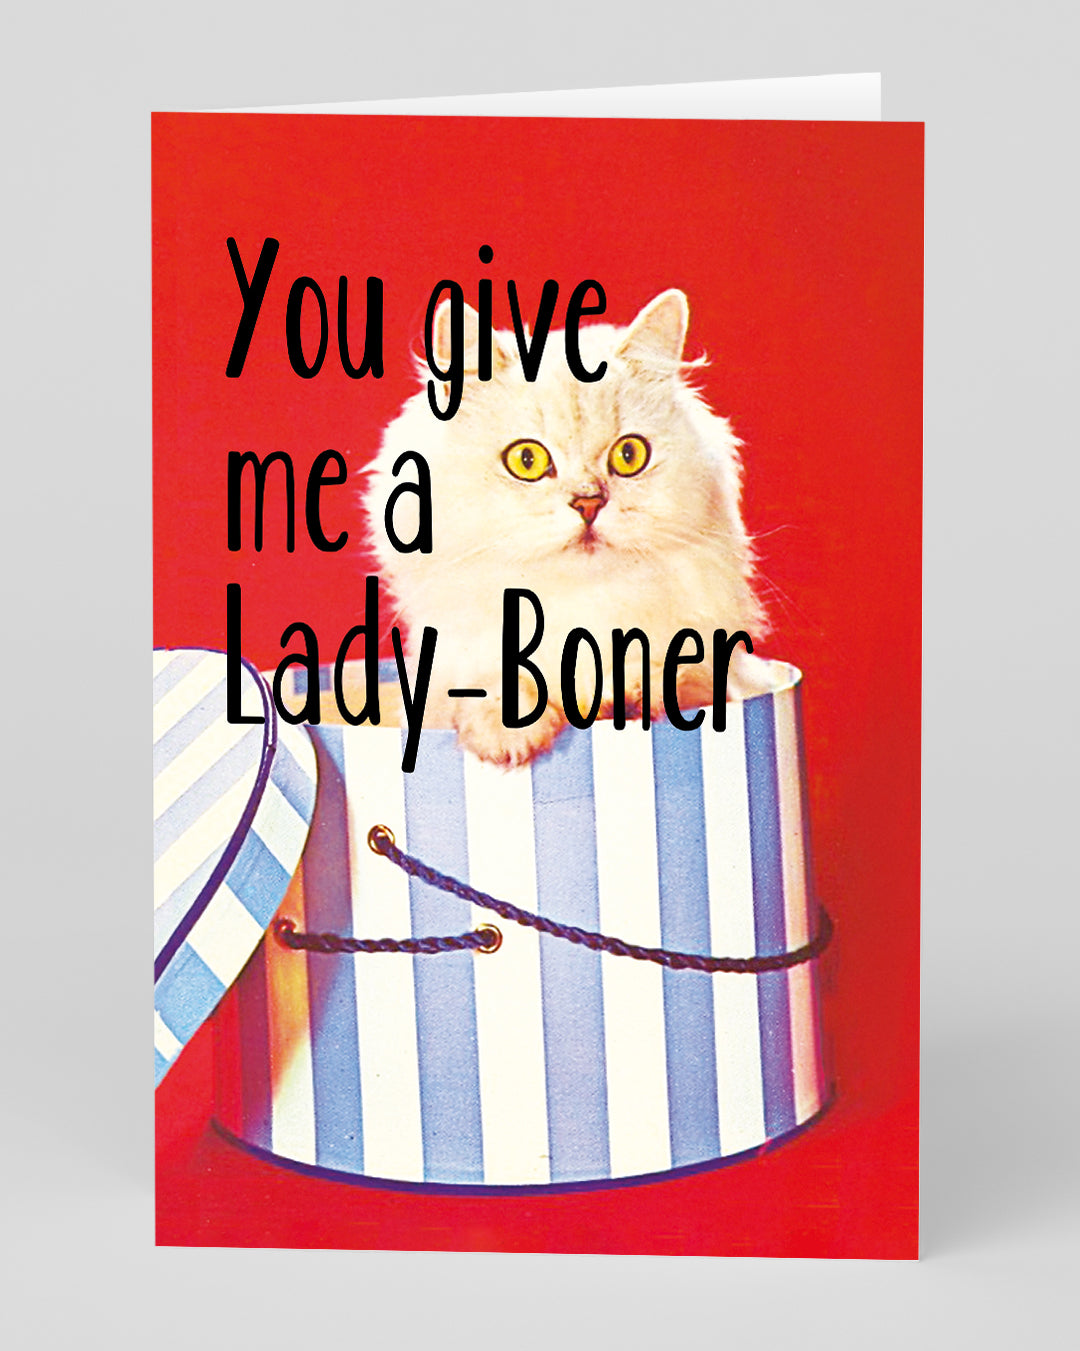 Valentine’s Day | Rude Valentines Card For Cat Lovers | Personalised You Give Me a Lady Boner Greeting Card | Ohh Deer Unique Valentine’s Card for Him or Her | Made In The UK, Eco-Friendly Materials, Plastic Free Packaging